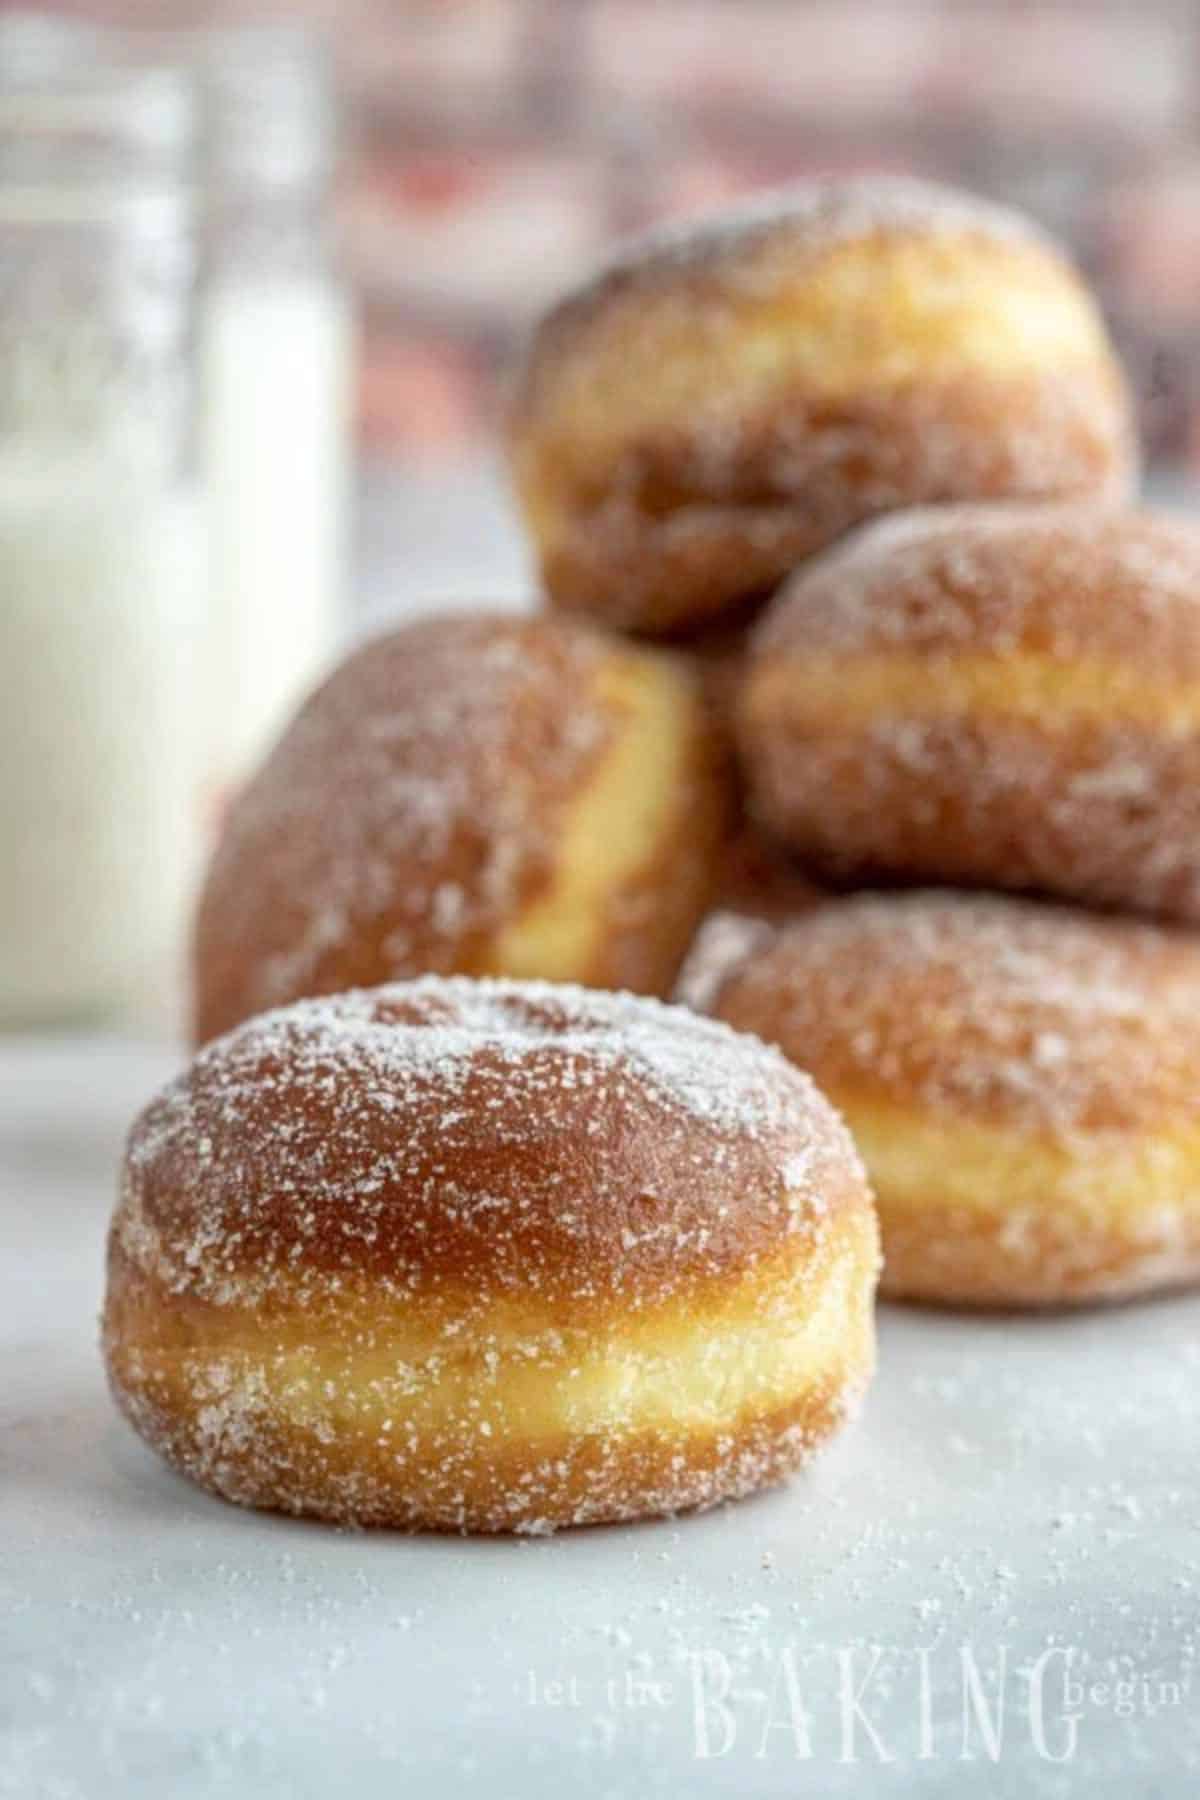 Crispy donuts on a table.